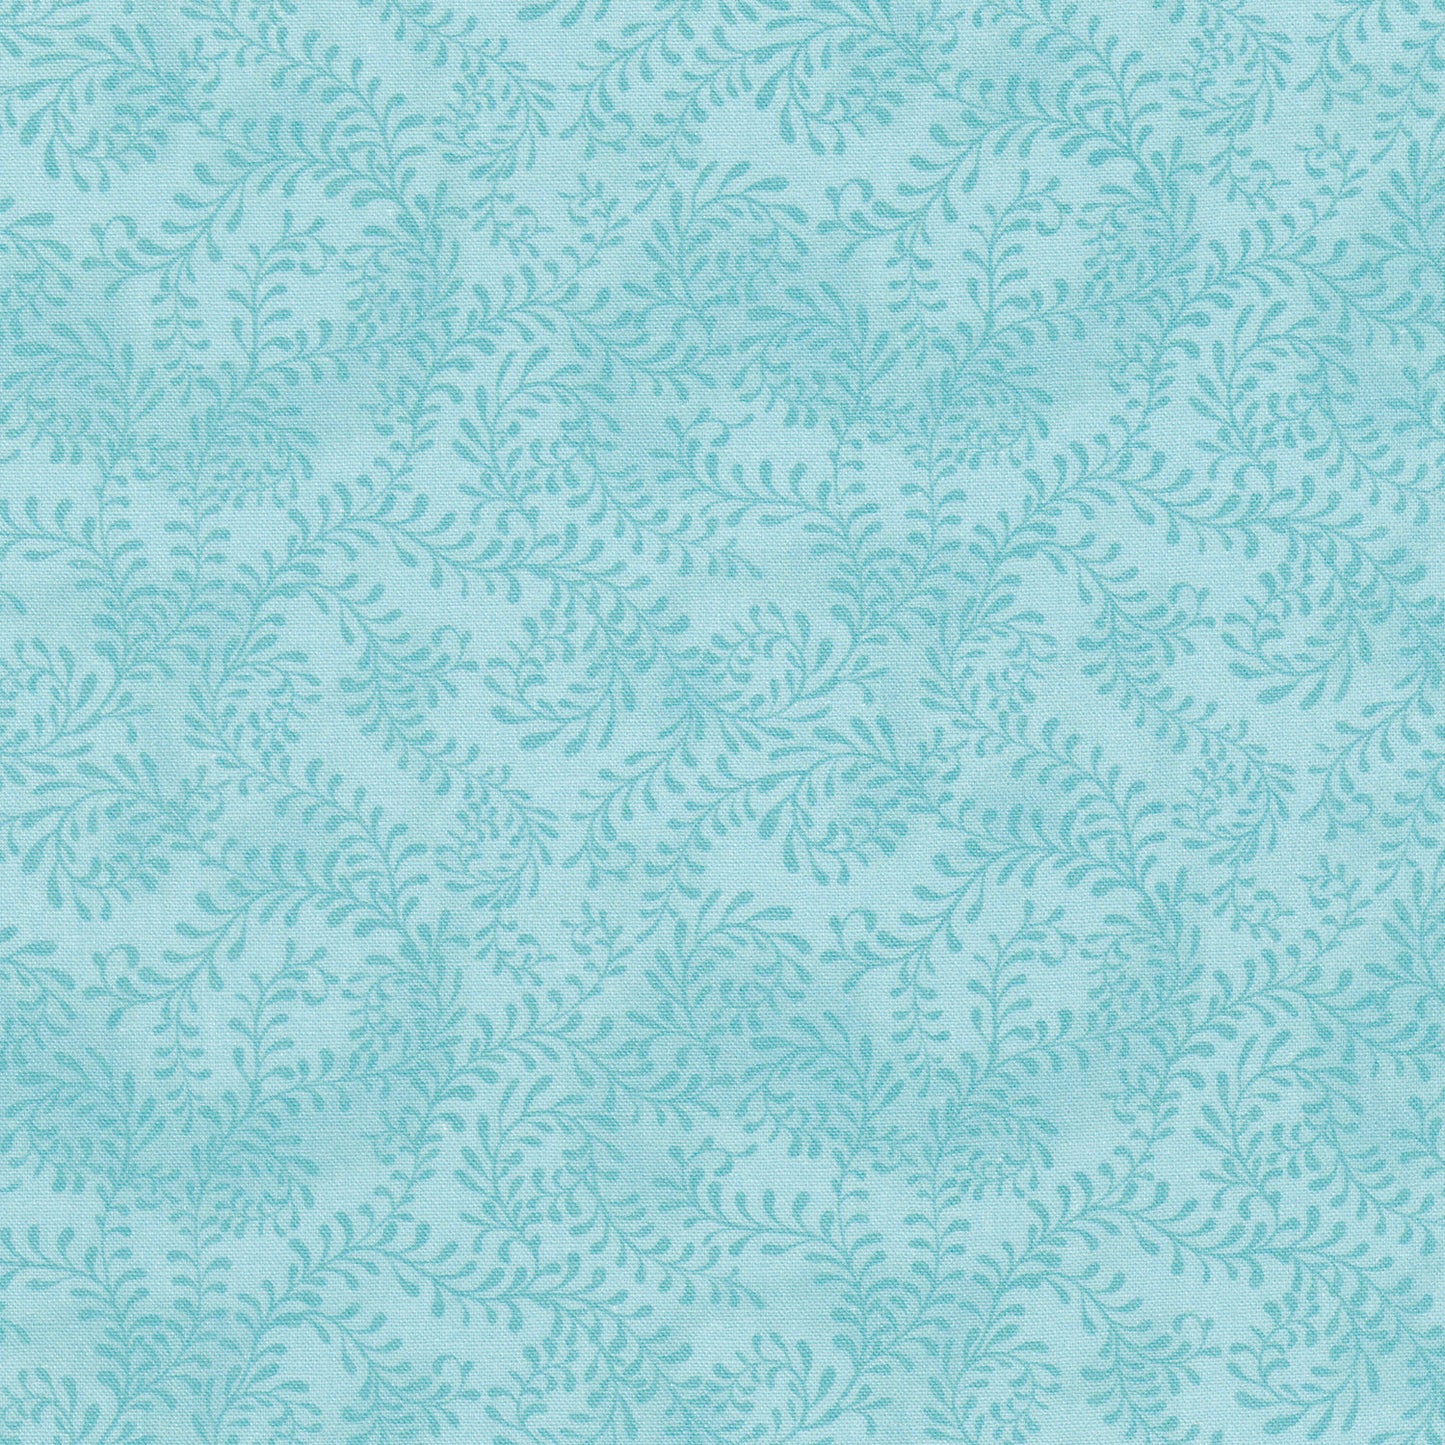 Wilmington Essentials - Swirling Leaves - Turquoise Yardage Primary Image